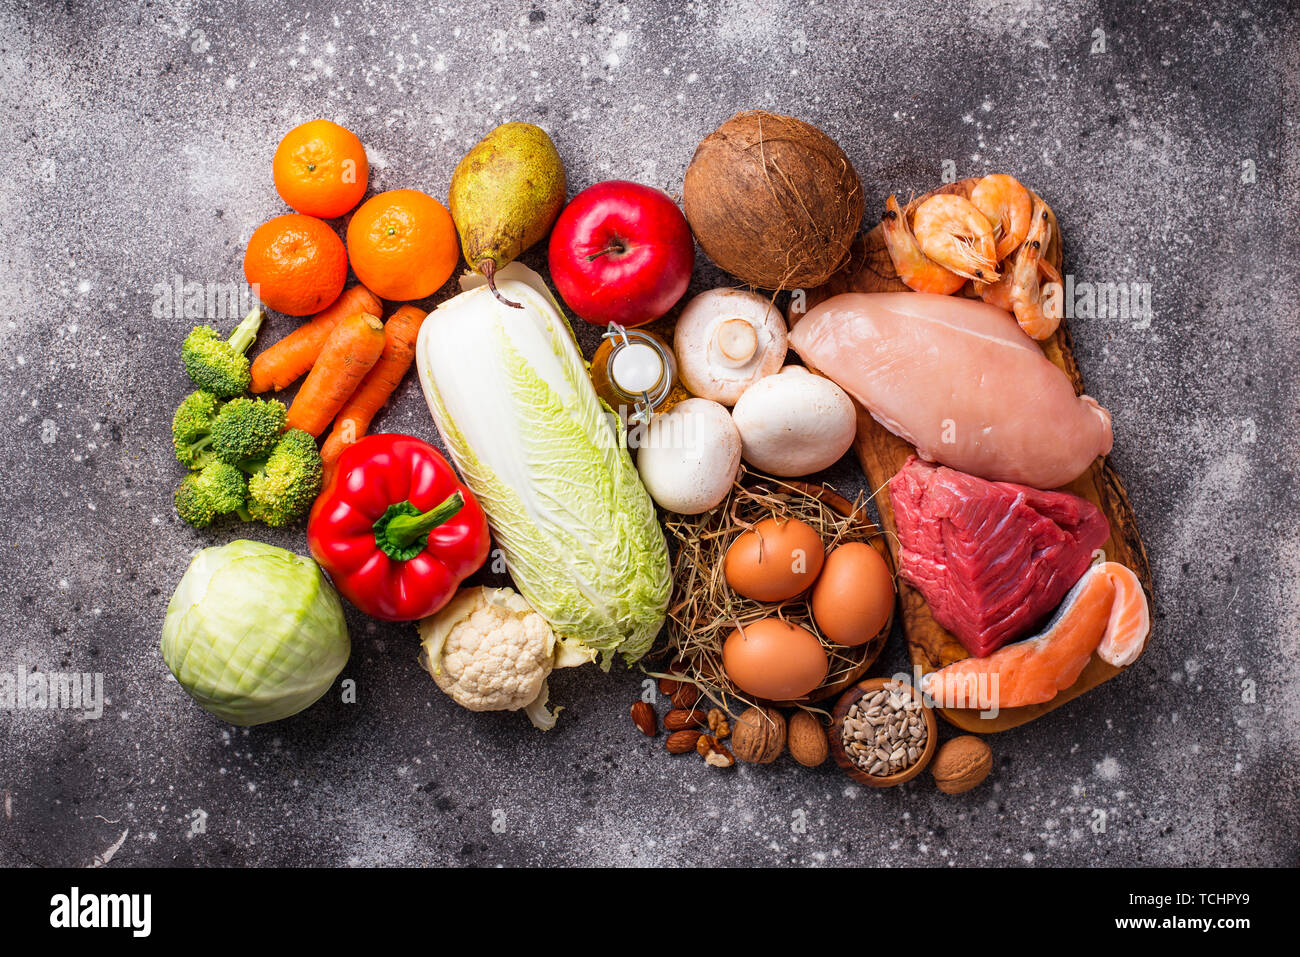 Paleo diet. Healthy high protein and low carbohydrate products Stock Photo